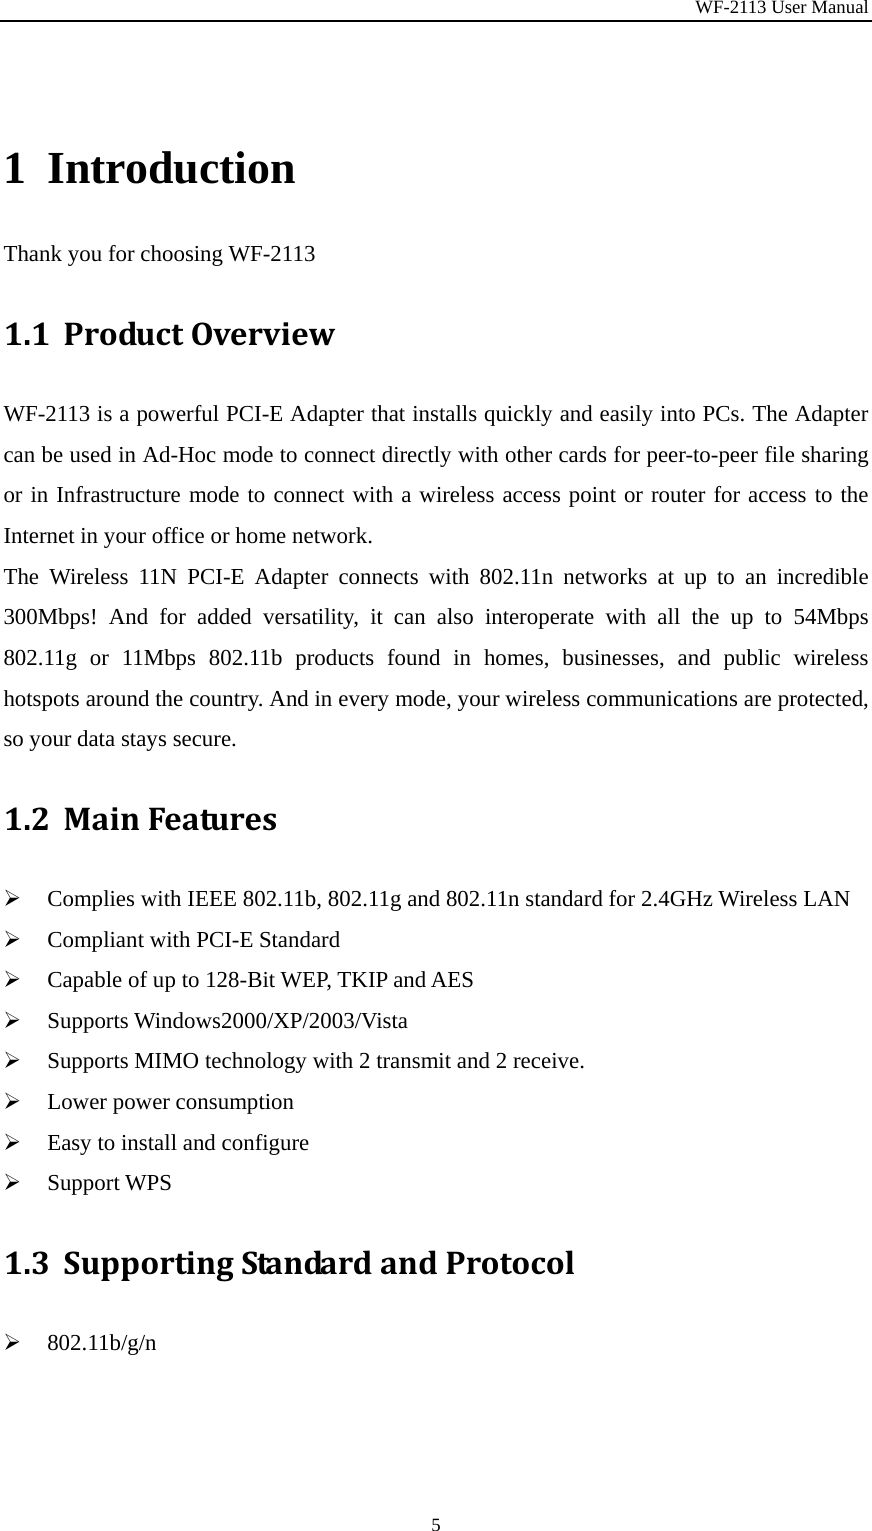 WF-2113 User Manual 5 1 Introduction Thank you for choosing WF-2113 1.1 ProductOverviewWF-2113 is a powerful PCI-E Adapter that installs quickly and easily into PCs. The Adapter can be used in Ad-Hoc mode to connect directly with other cards for peer-to-peer file sharing or in Infrastructure mode to connect with a wireless access point or router for access to the Internet in your office or home network. The Wireless 11N PCI-E Adapter connects with 802.11n networks at up to an incredible 300Mbps! And for added versatility, it can also interoperate with all the up to 54Mbps 802.11g or 11Mbps 802.11b products found in homes, businesses, and public wireless hotspots around the country. And in every mode, your wireless communications are protected, so your data stays secure. 1.2 MainFeatures¾ Complies with IEEE 802.11b, 802.11g and 802.11n standard for 2.4GHz Wireless LAN ¾ Compliant with PCI-E Standard ¾ Capable of up to 128-Bit WEP, TKIP and AES ¾ Supports Windows2000/XP/2003/Vista ¾ Supports MIMO technology with 2 transmit and 2 receive. ¾ Lower power consumption ¾ Easy to install and configure ¾ Support WPS 1.3 SupportingStandardandProtocol¾ 802.11b/g/n 